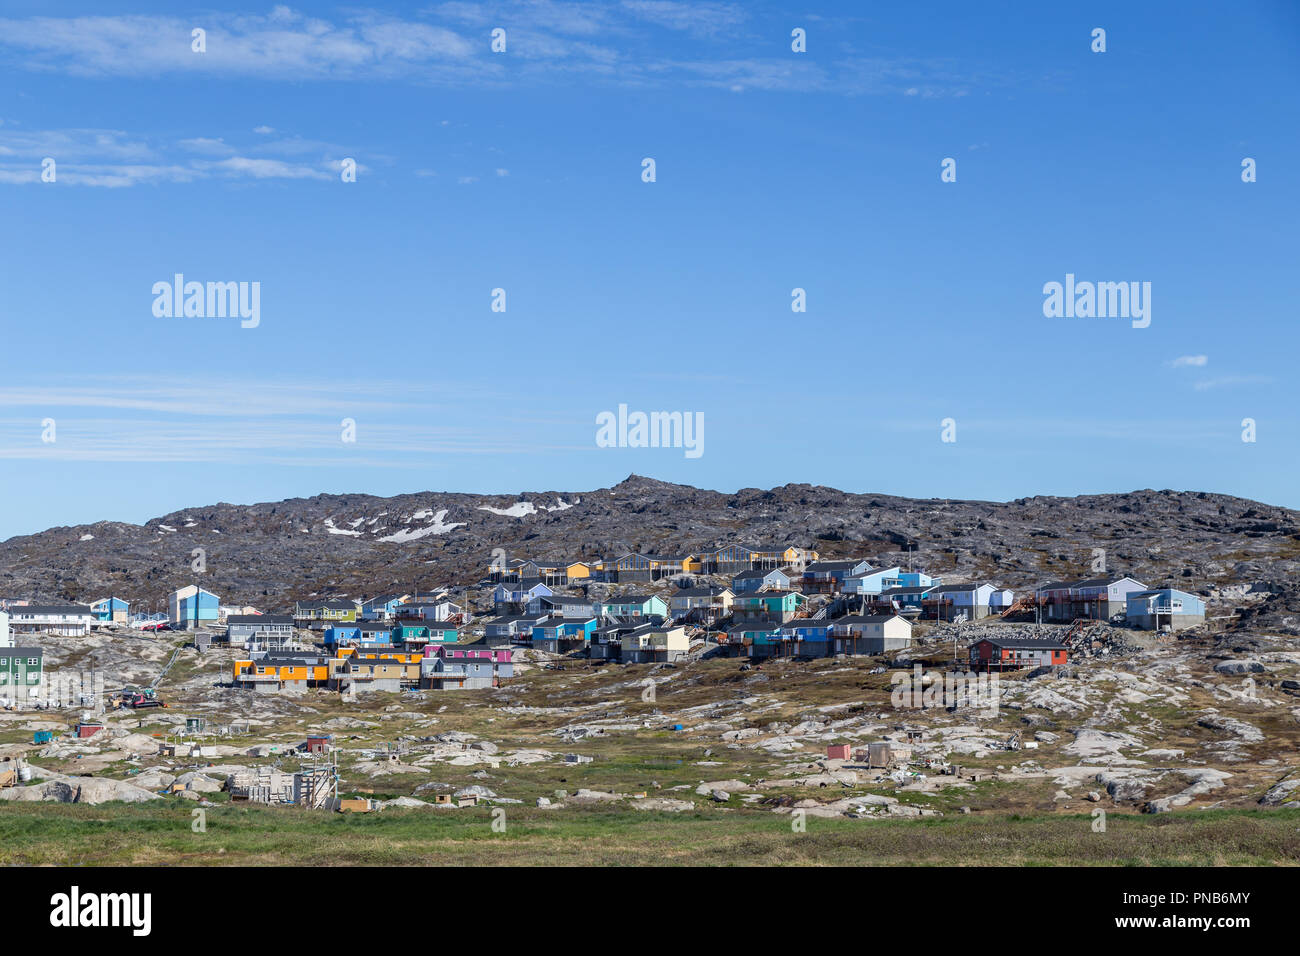 Colorful houses in Ilulissat, Greenland Stock Photo